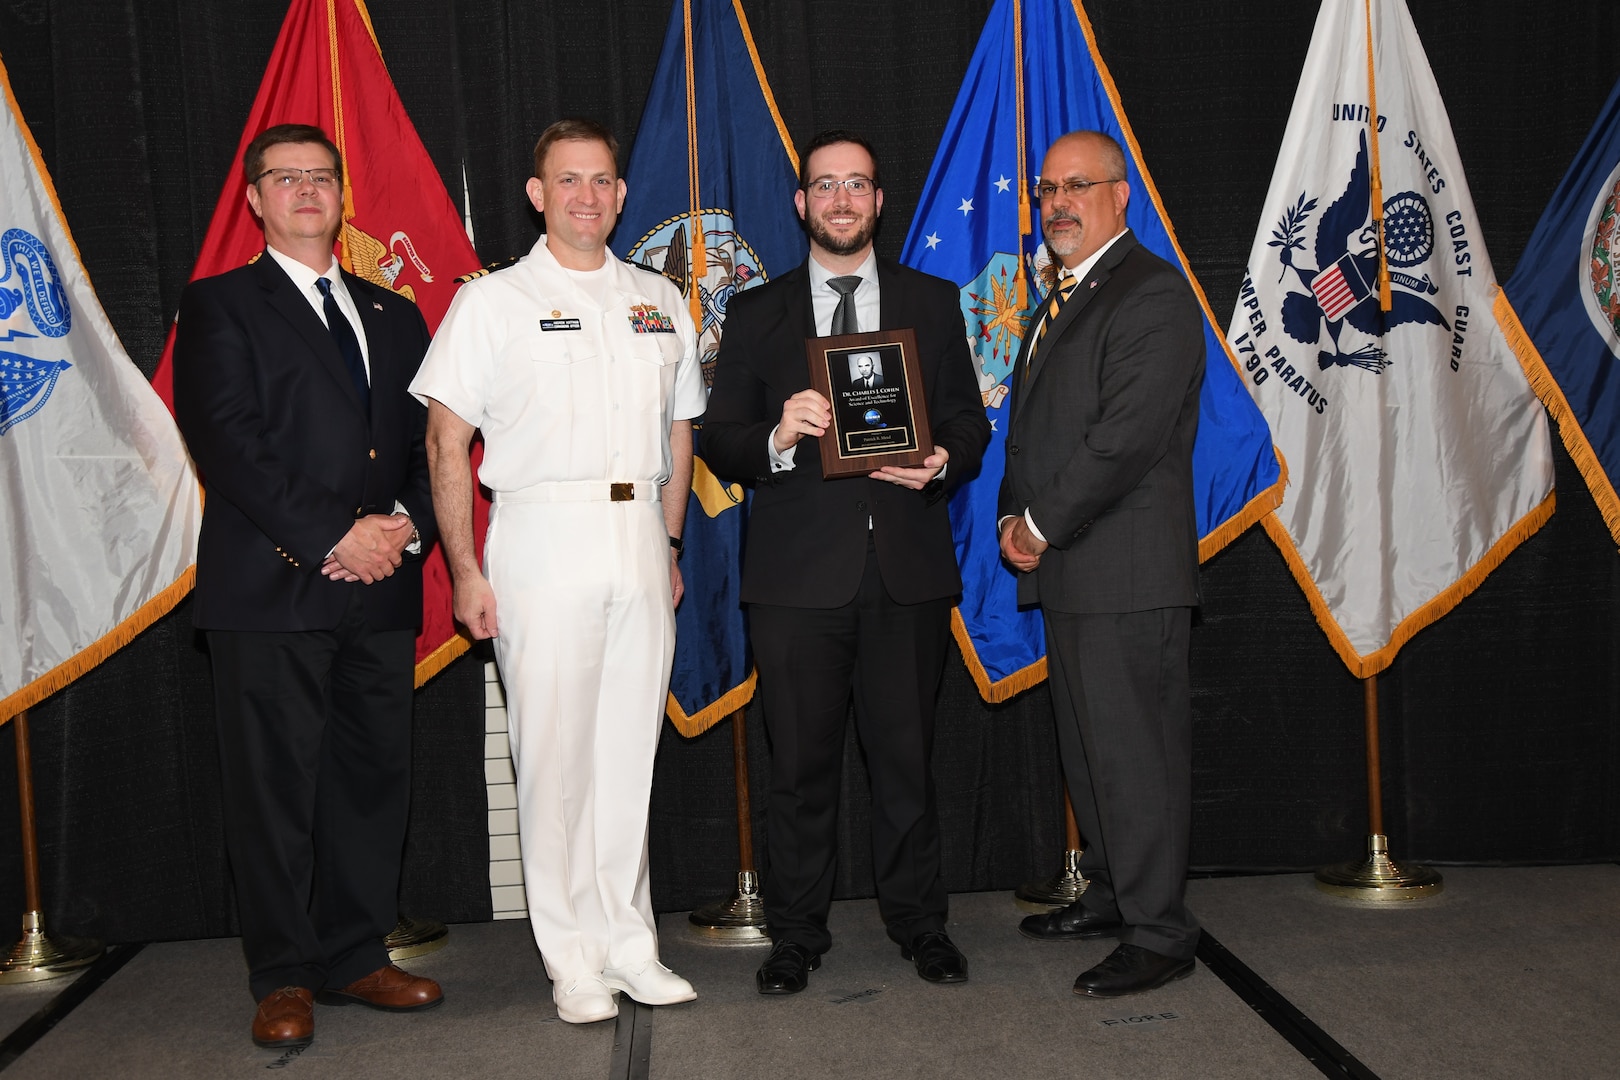 IMAGE: Patrick Mead is presented the Dr. Charles J. Cohen Award at Naval Surface Warfare Center Dahlgren Division's annual awards ceremony, Apr. 26 at the Fredericksburg Expo and Conference Center.

The award recognizes those who fundamentally impact science or technology with work that also measurably impacts capability.